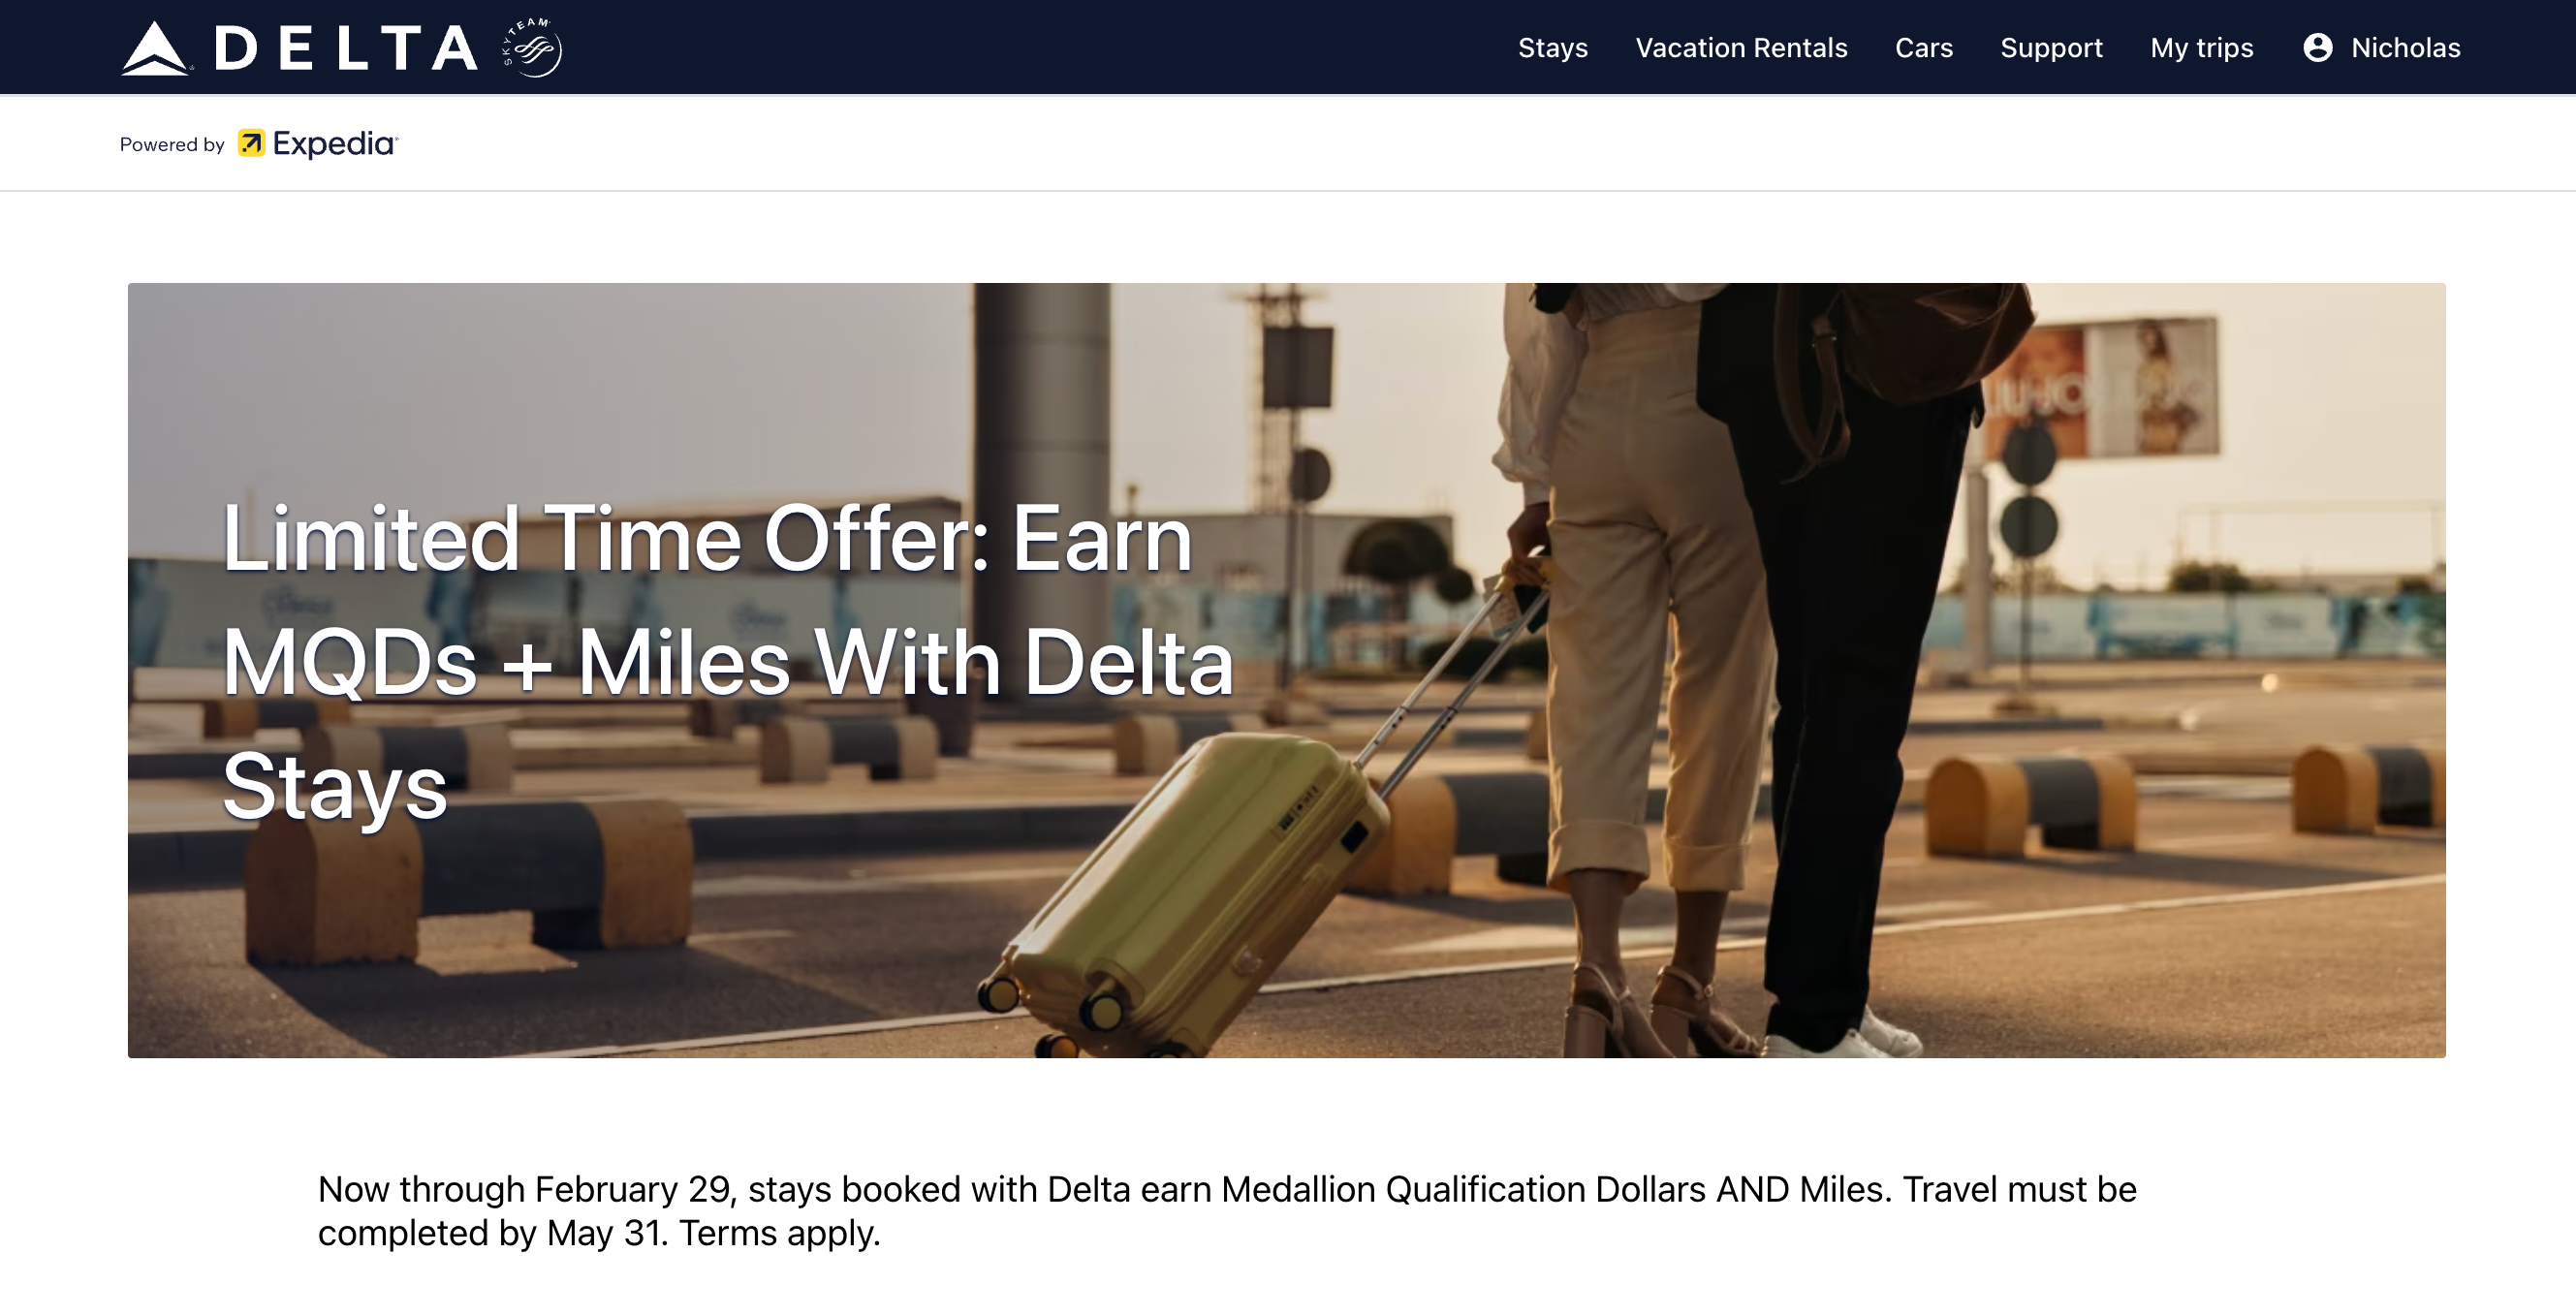 The landing page for a limited-time offer to earn MQDs on hotels booked via Delta Stays